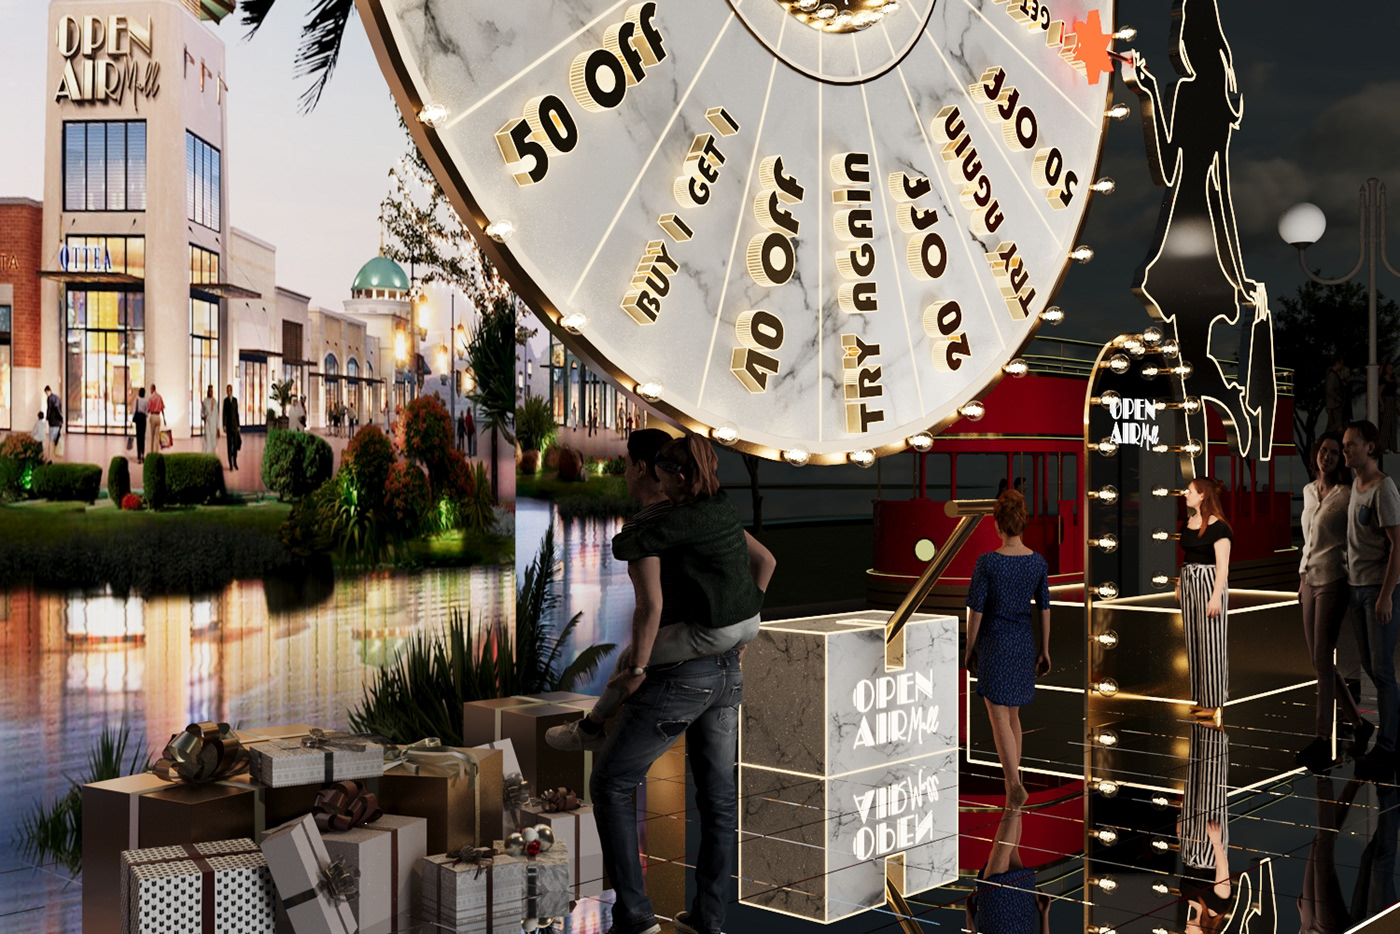 Wheel of Fortune activation design Advertising  marketing   Fashion  open air mall spin and win